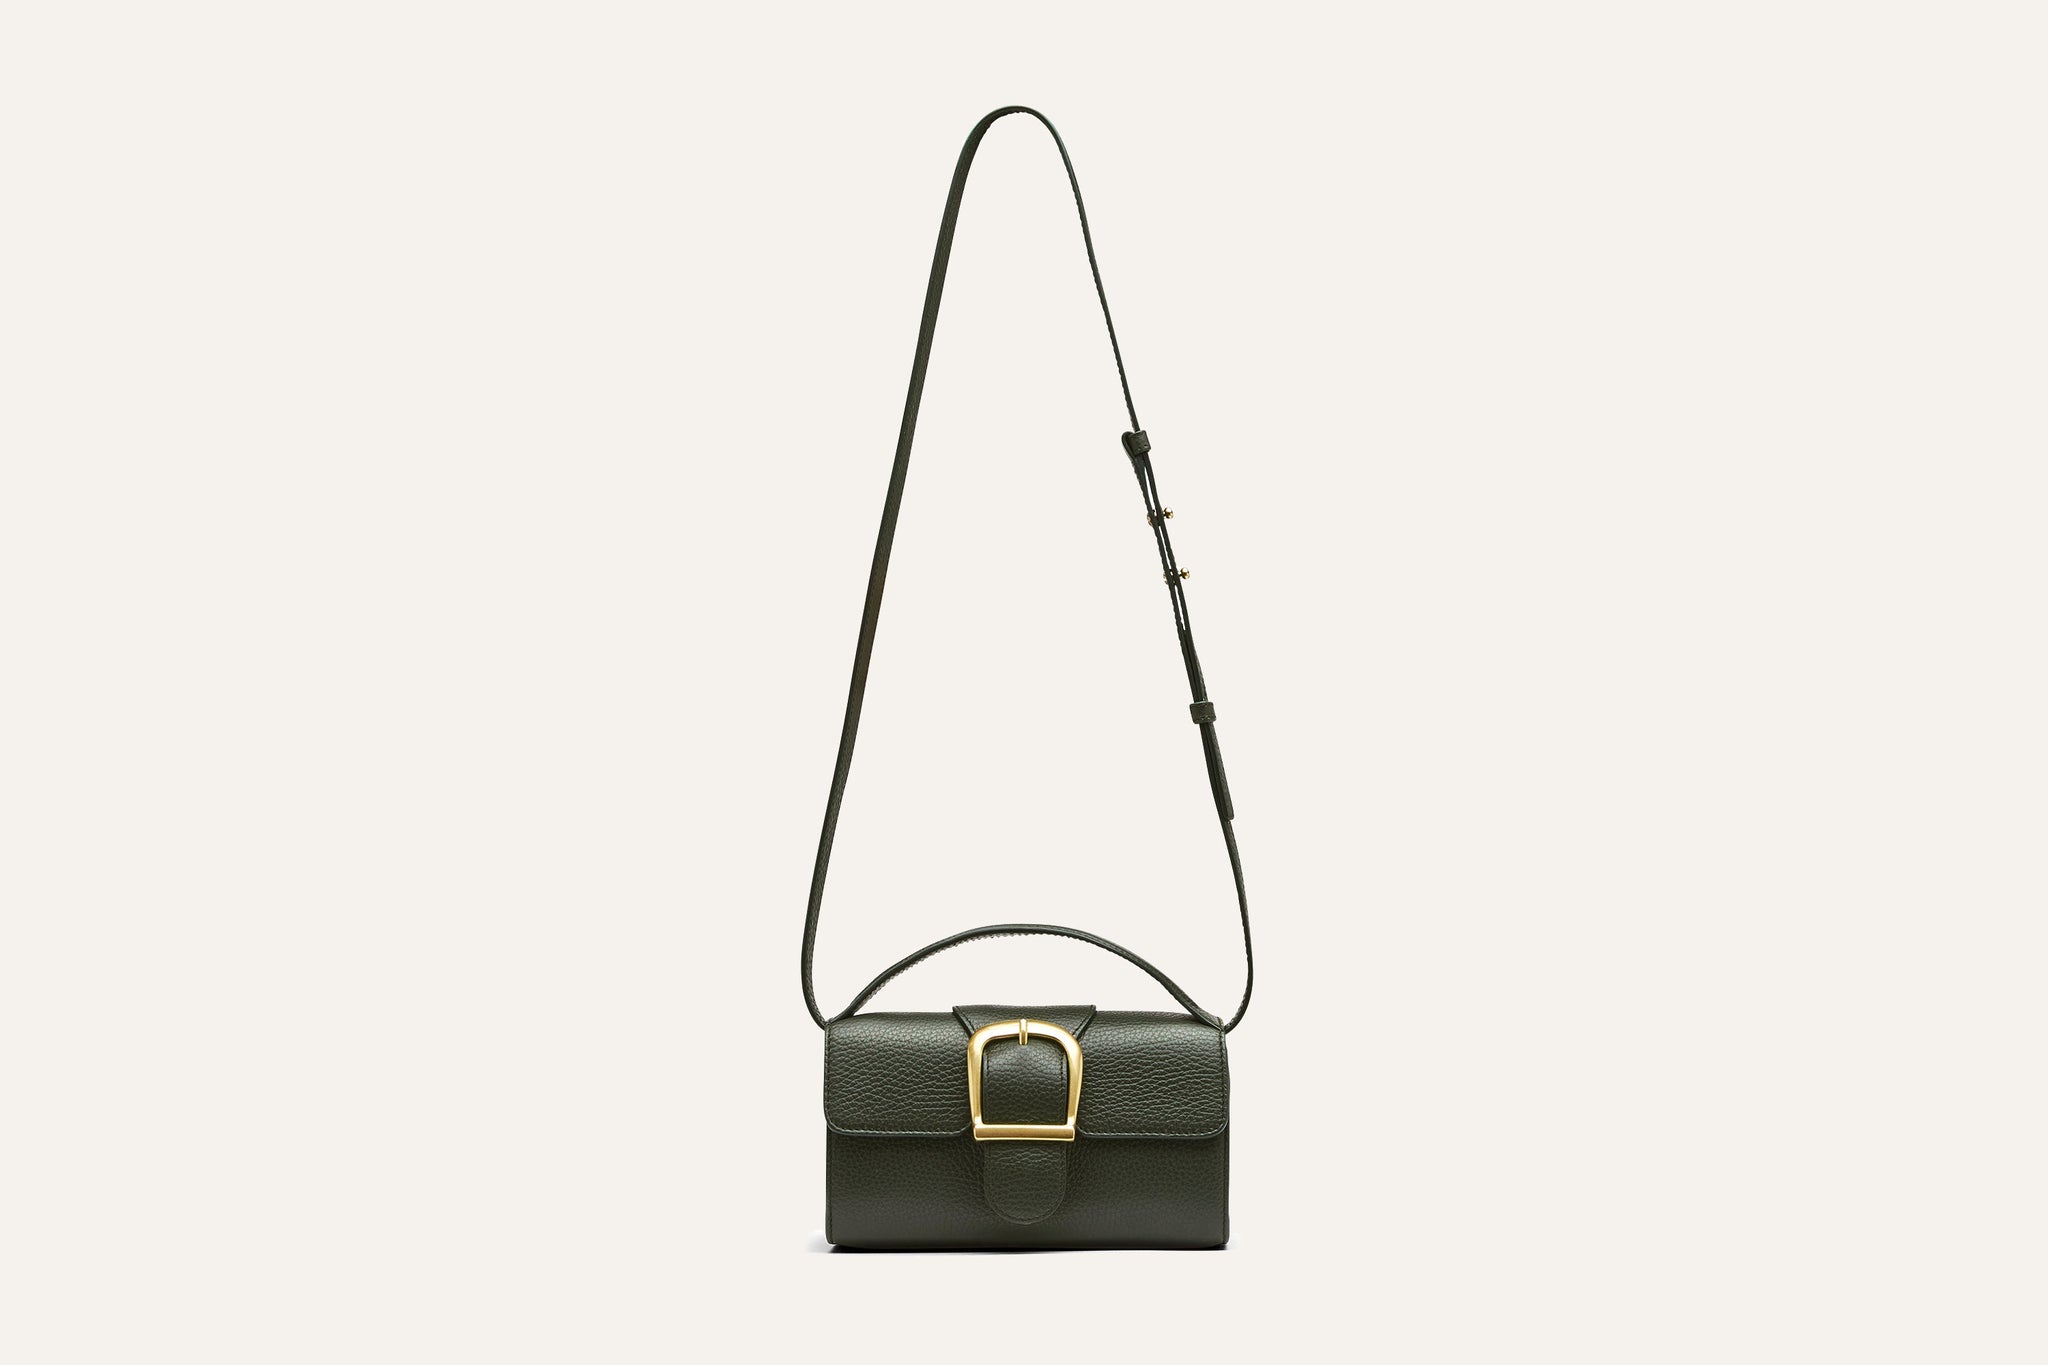 Rylan, Rylan Studio, 9.40 Forest Soft Grained Mini Satchel with Flat Handle, Made in Italy